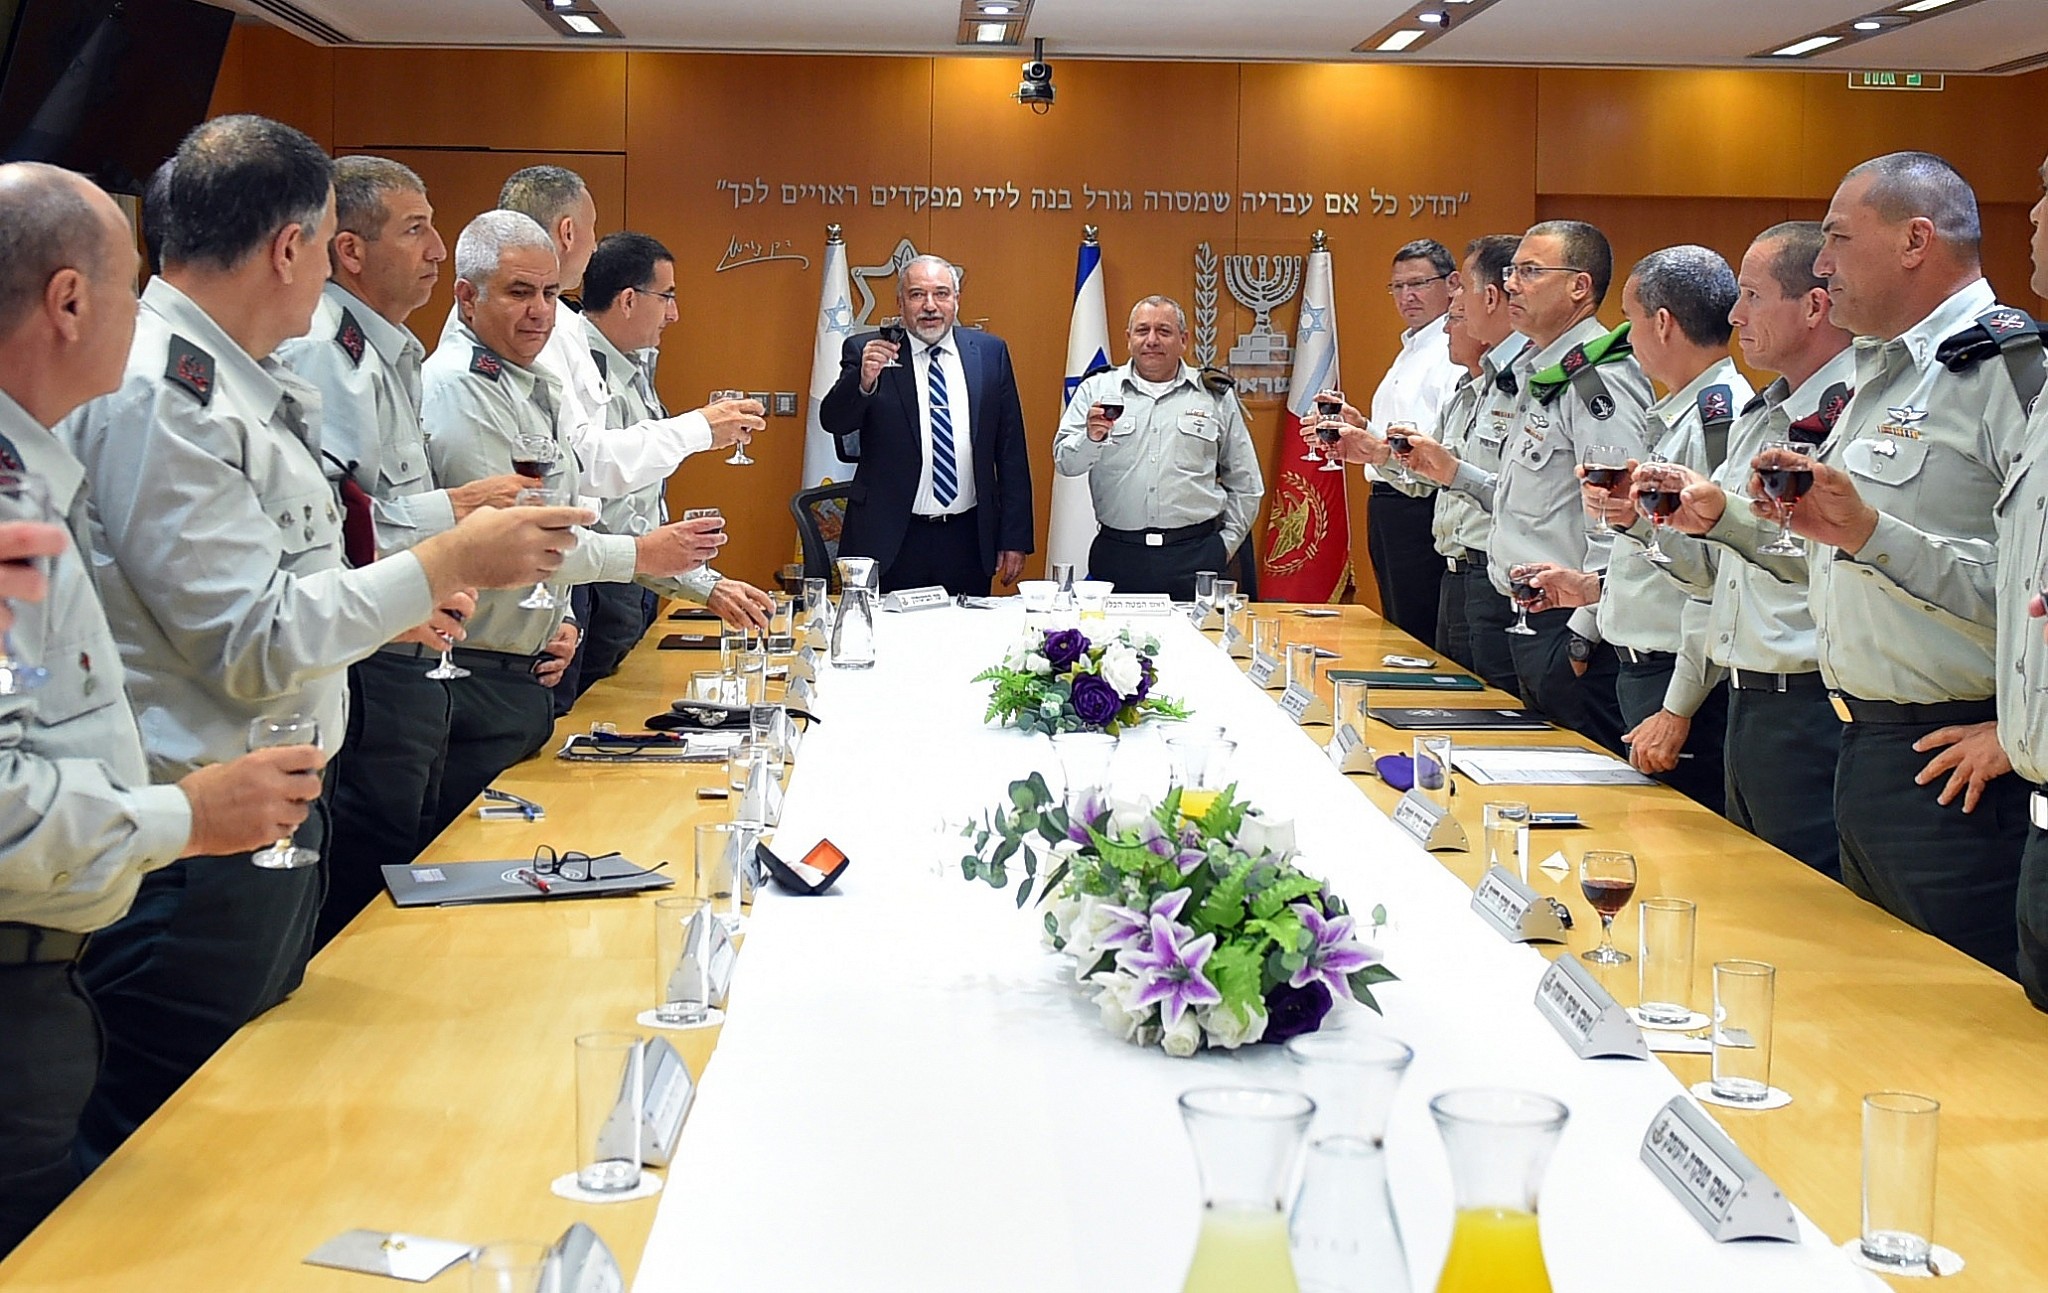 Defense Minister Avigdor Liberman, center, raises a toast with the IDF General Staff at the army’s Tel Aviv headquarters on April 16, 2018, in honor of Israel’s upcoming Independence Day this week. (Ariel Hermoni/Defense Ministry)